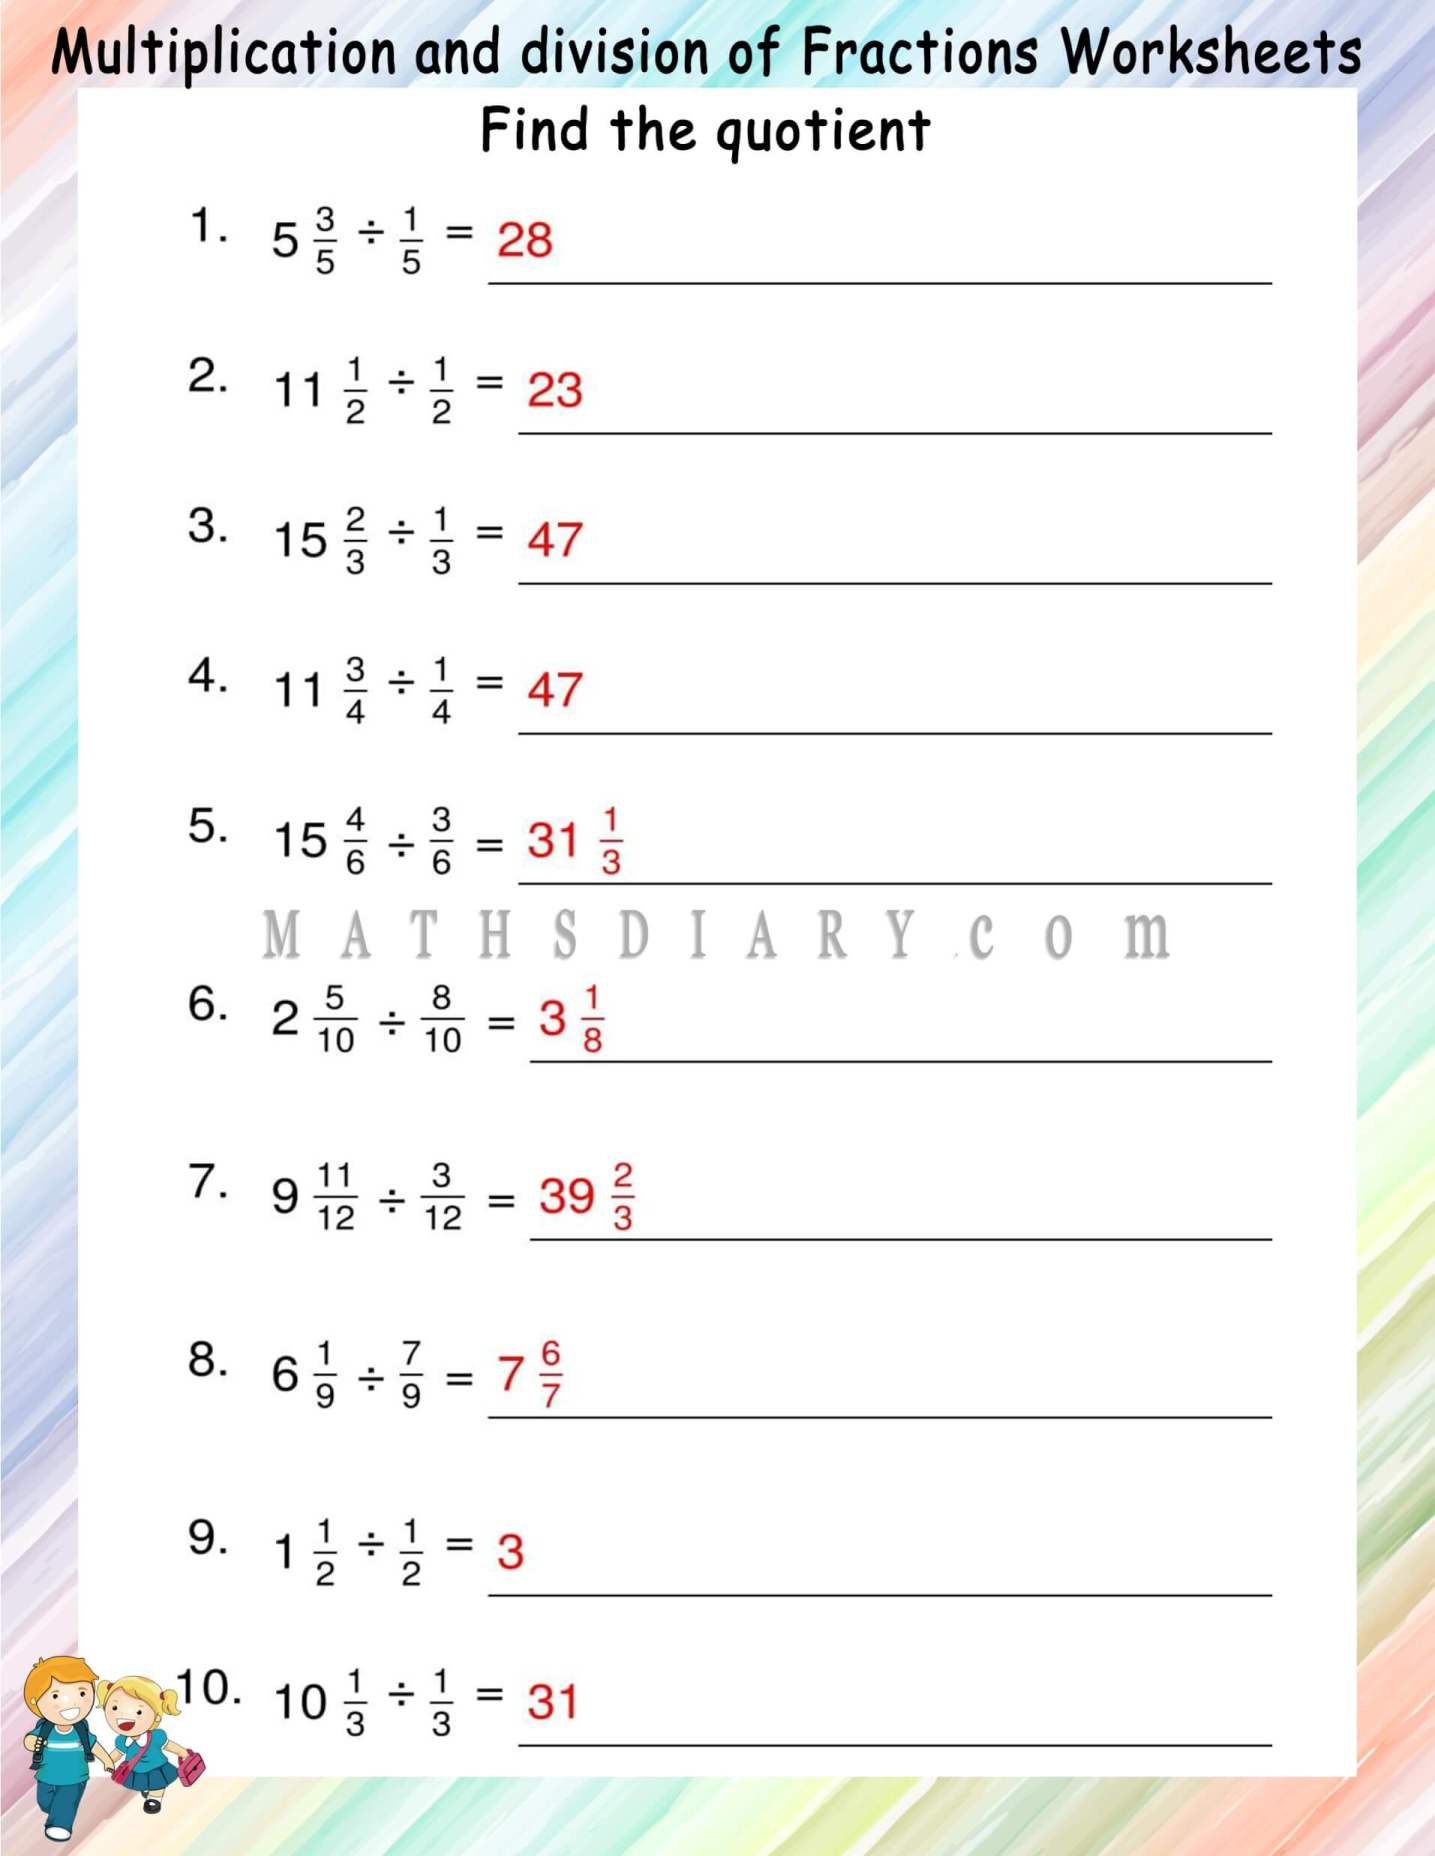 Dividing whole number by fractions worksheets - Math Worksheets ...